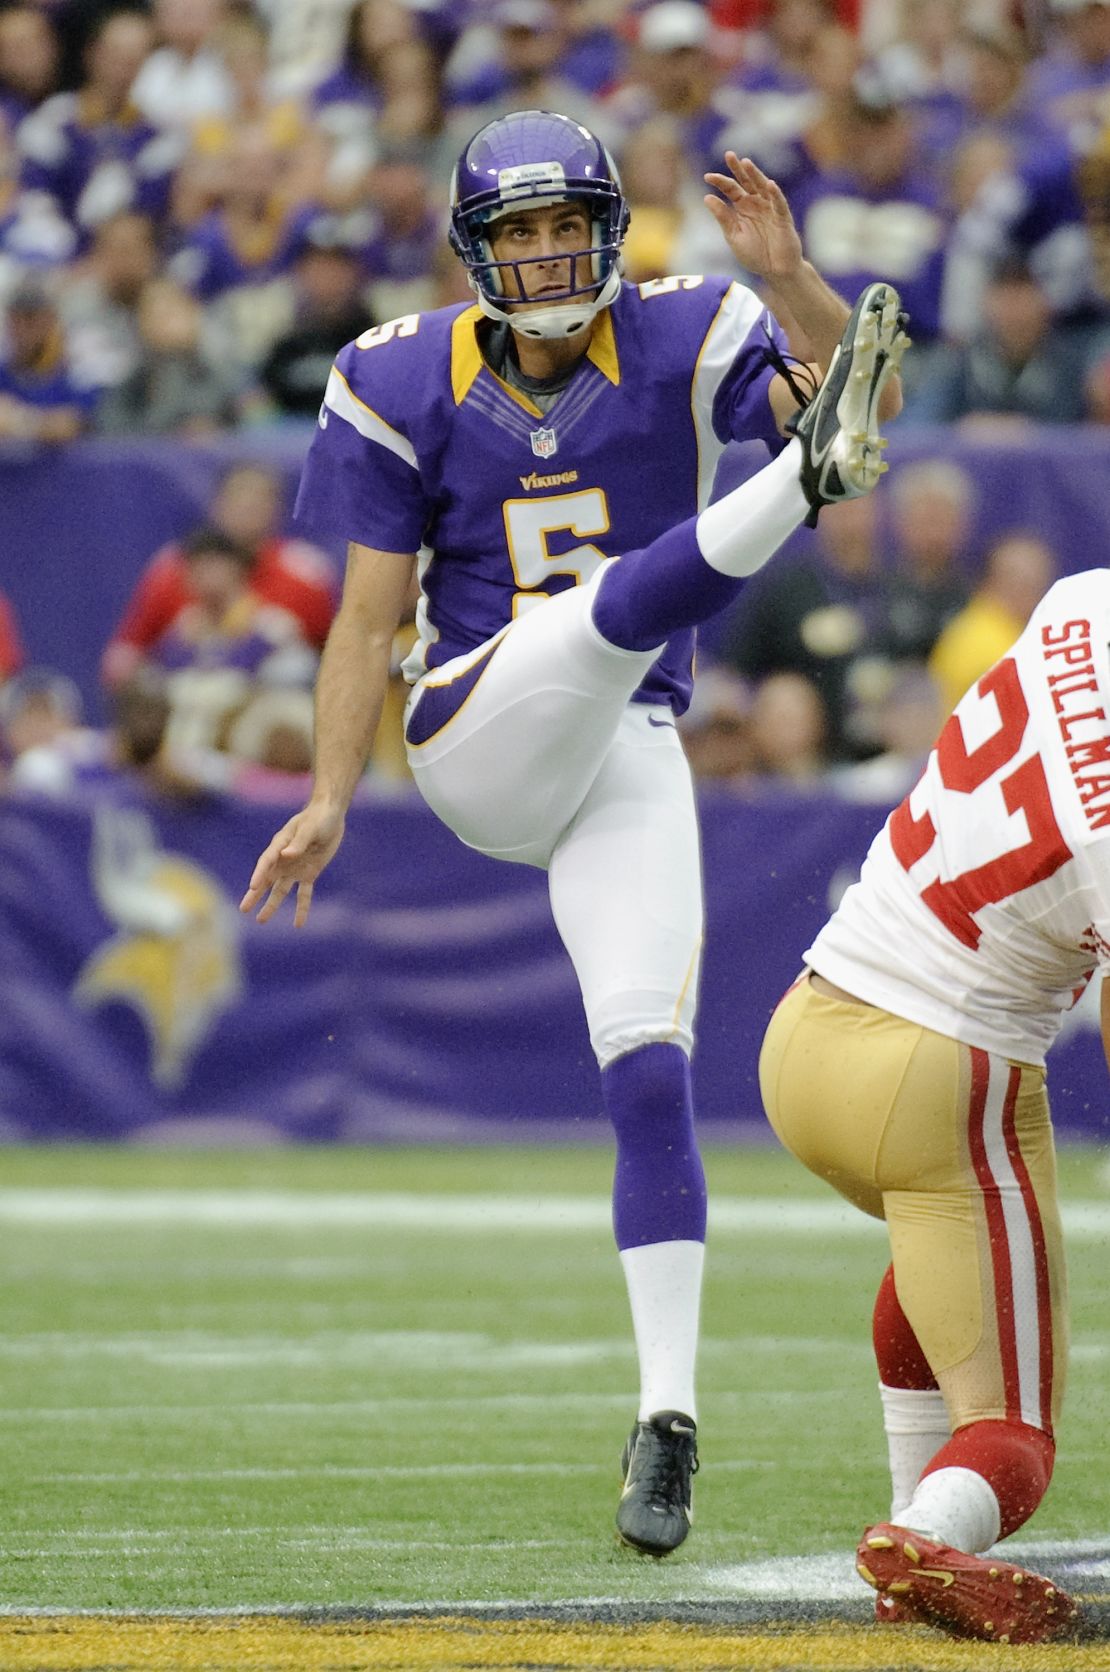 Chris Kluwe, #5 of the Minnesota Vikings, punts the ball during a game against the San Francisco 49ers.